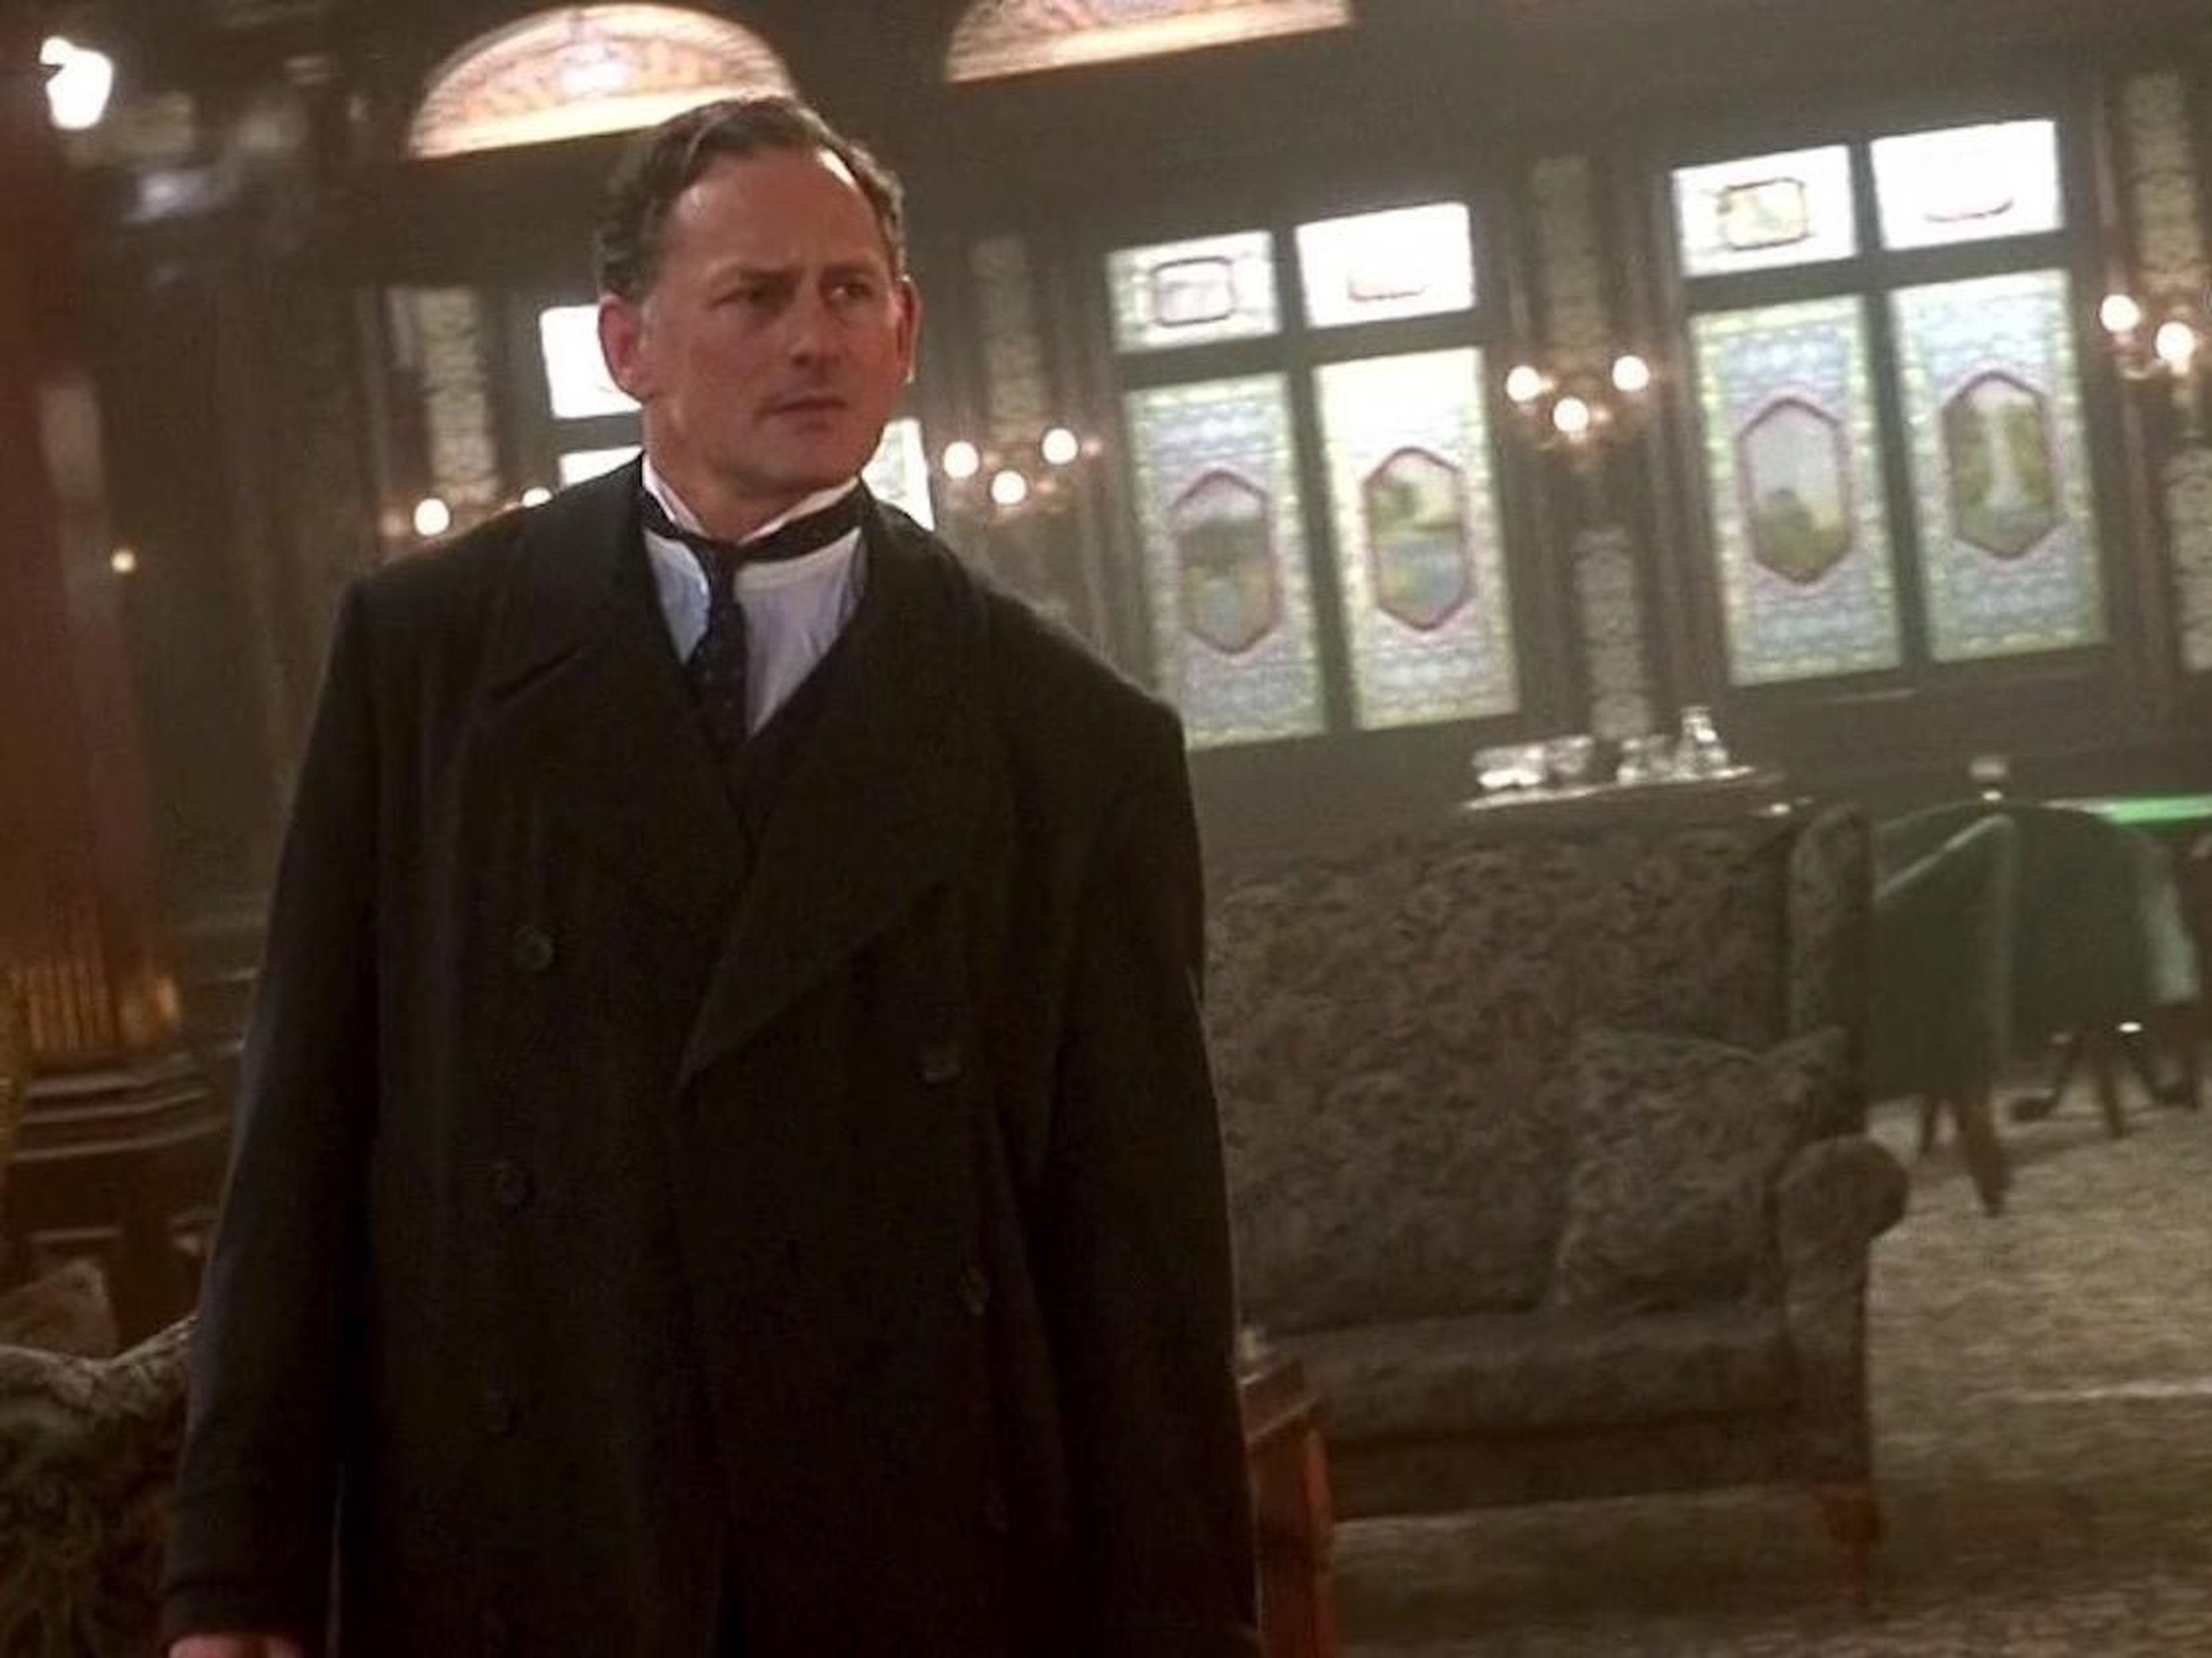 The Titanic's designer, Thomas Andrews, is said to have been last seen in the smoke room. James Cameron's 1997 film "Titanic" reflects that and alludes that this is where Andrews went down with the ship.